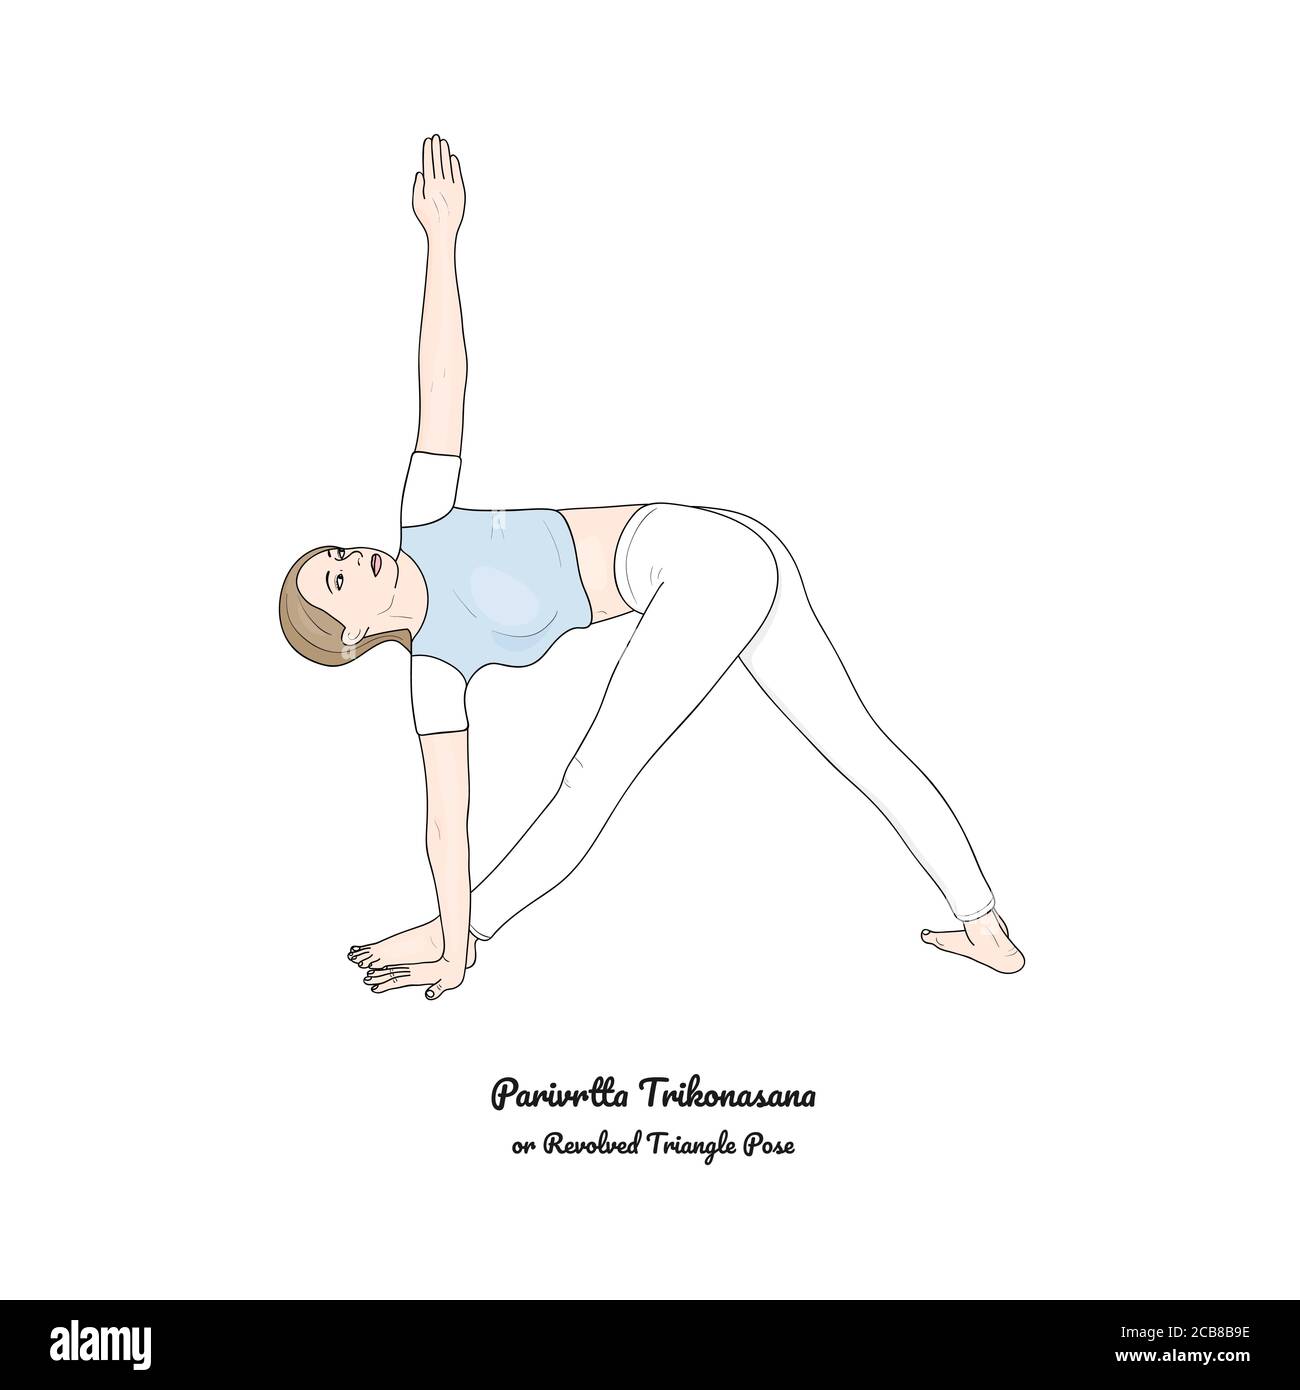 Comprehensive Guide to Yoga Poses for Beginners: From Basic to Advanced |  The Art of Living